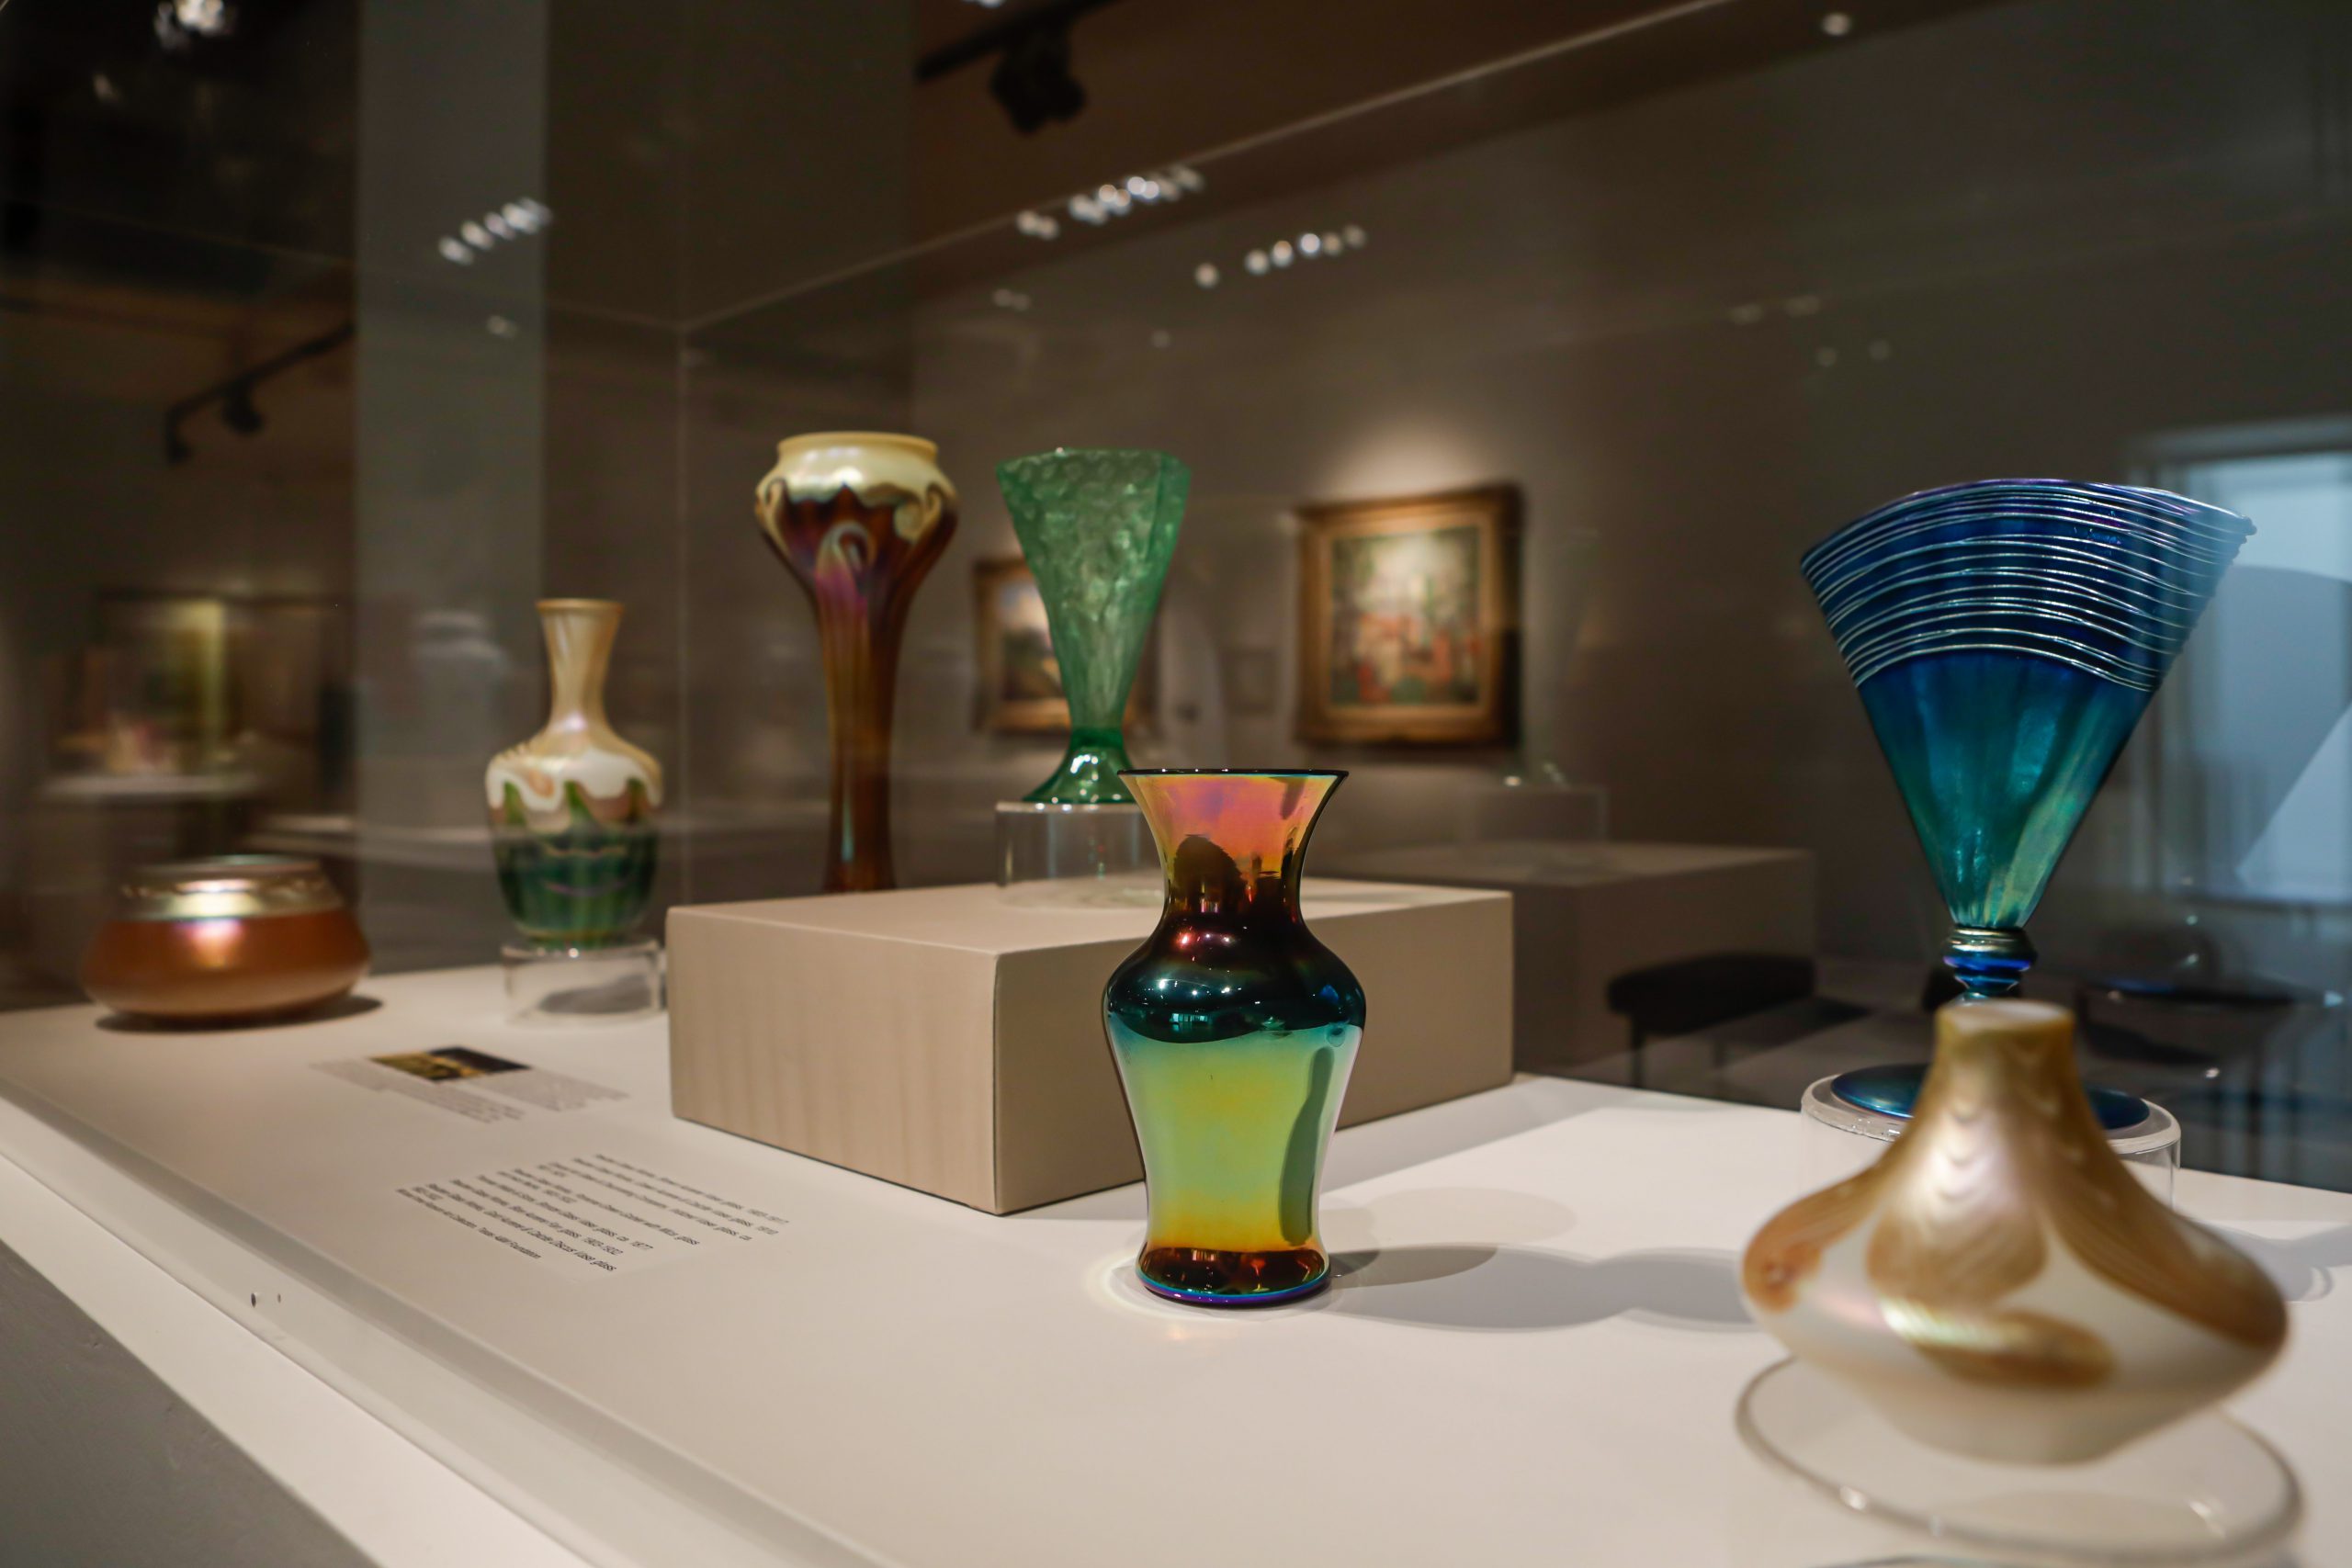 Display cases of small, glass jars and vases